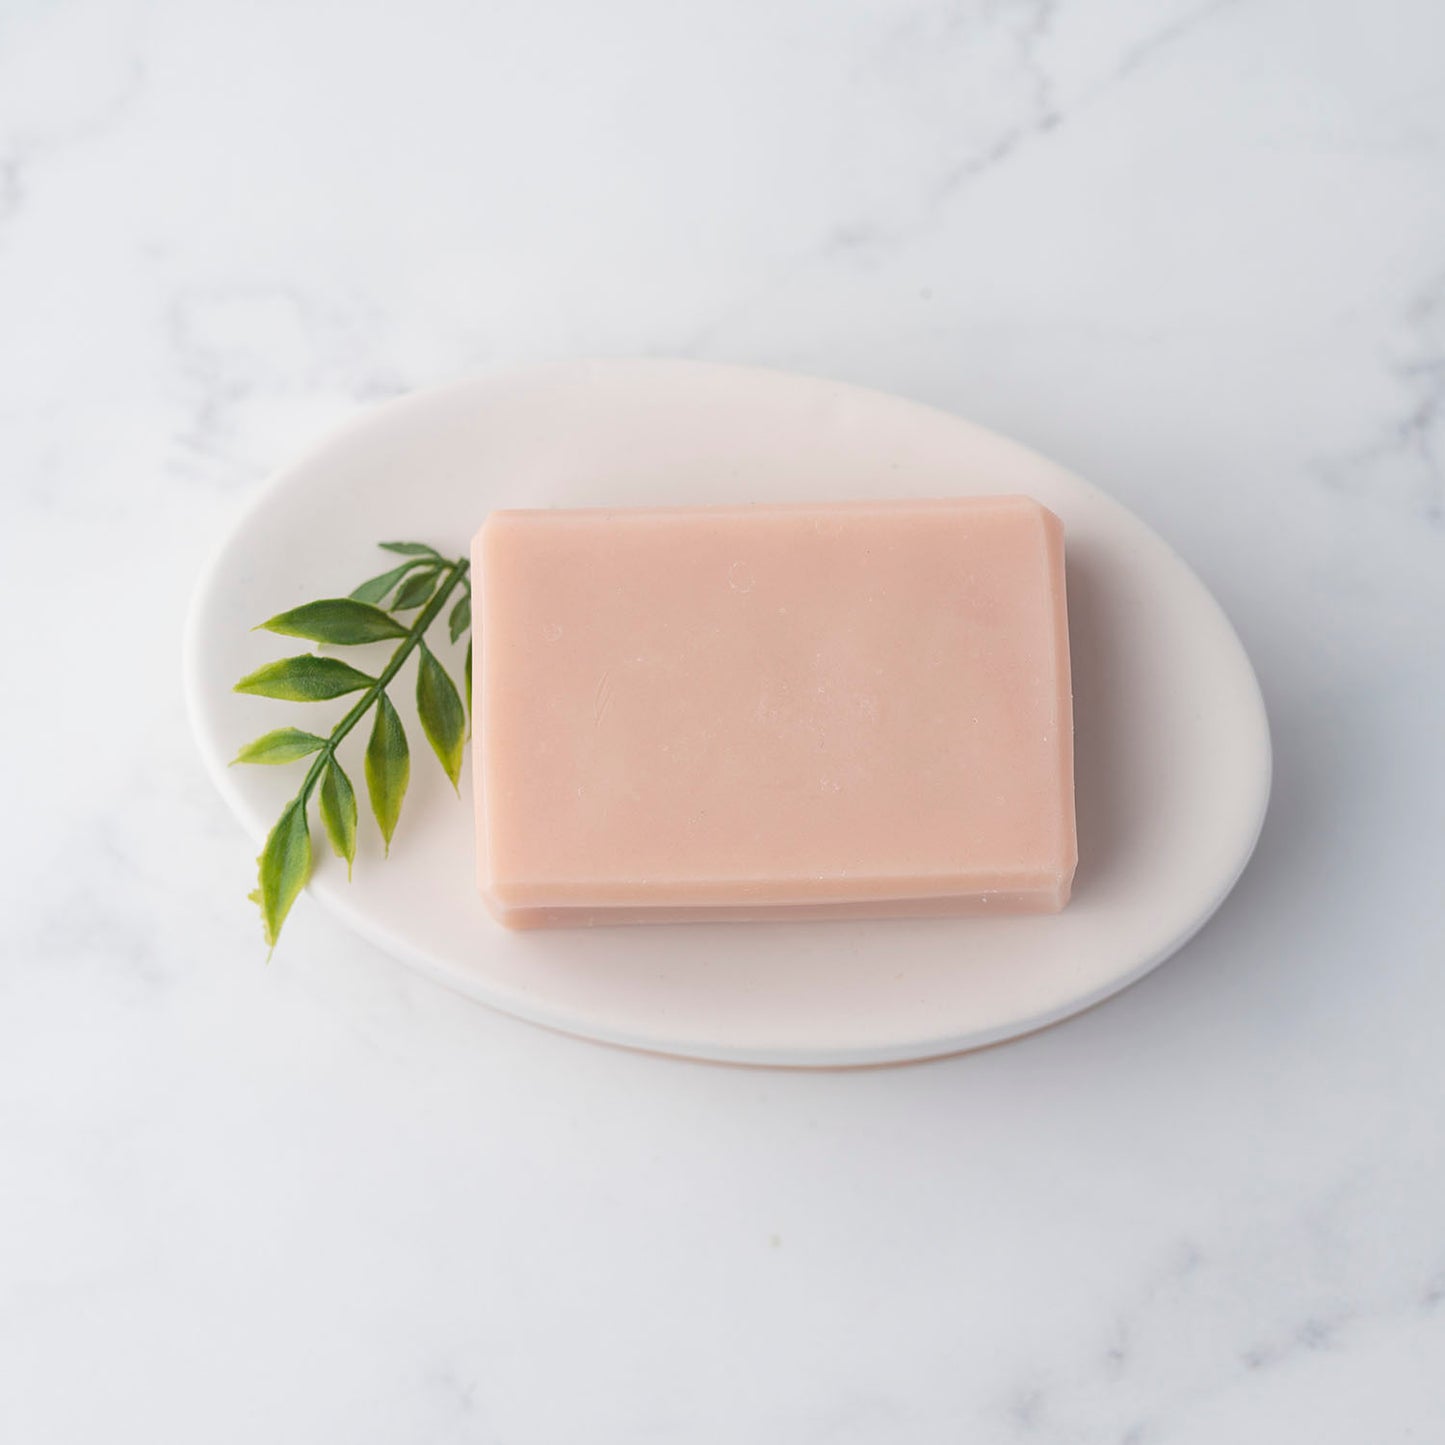 She'a Goddess Cleanse Bar | Hydrating Shave Soap